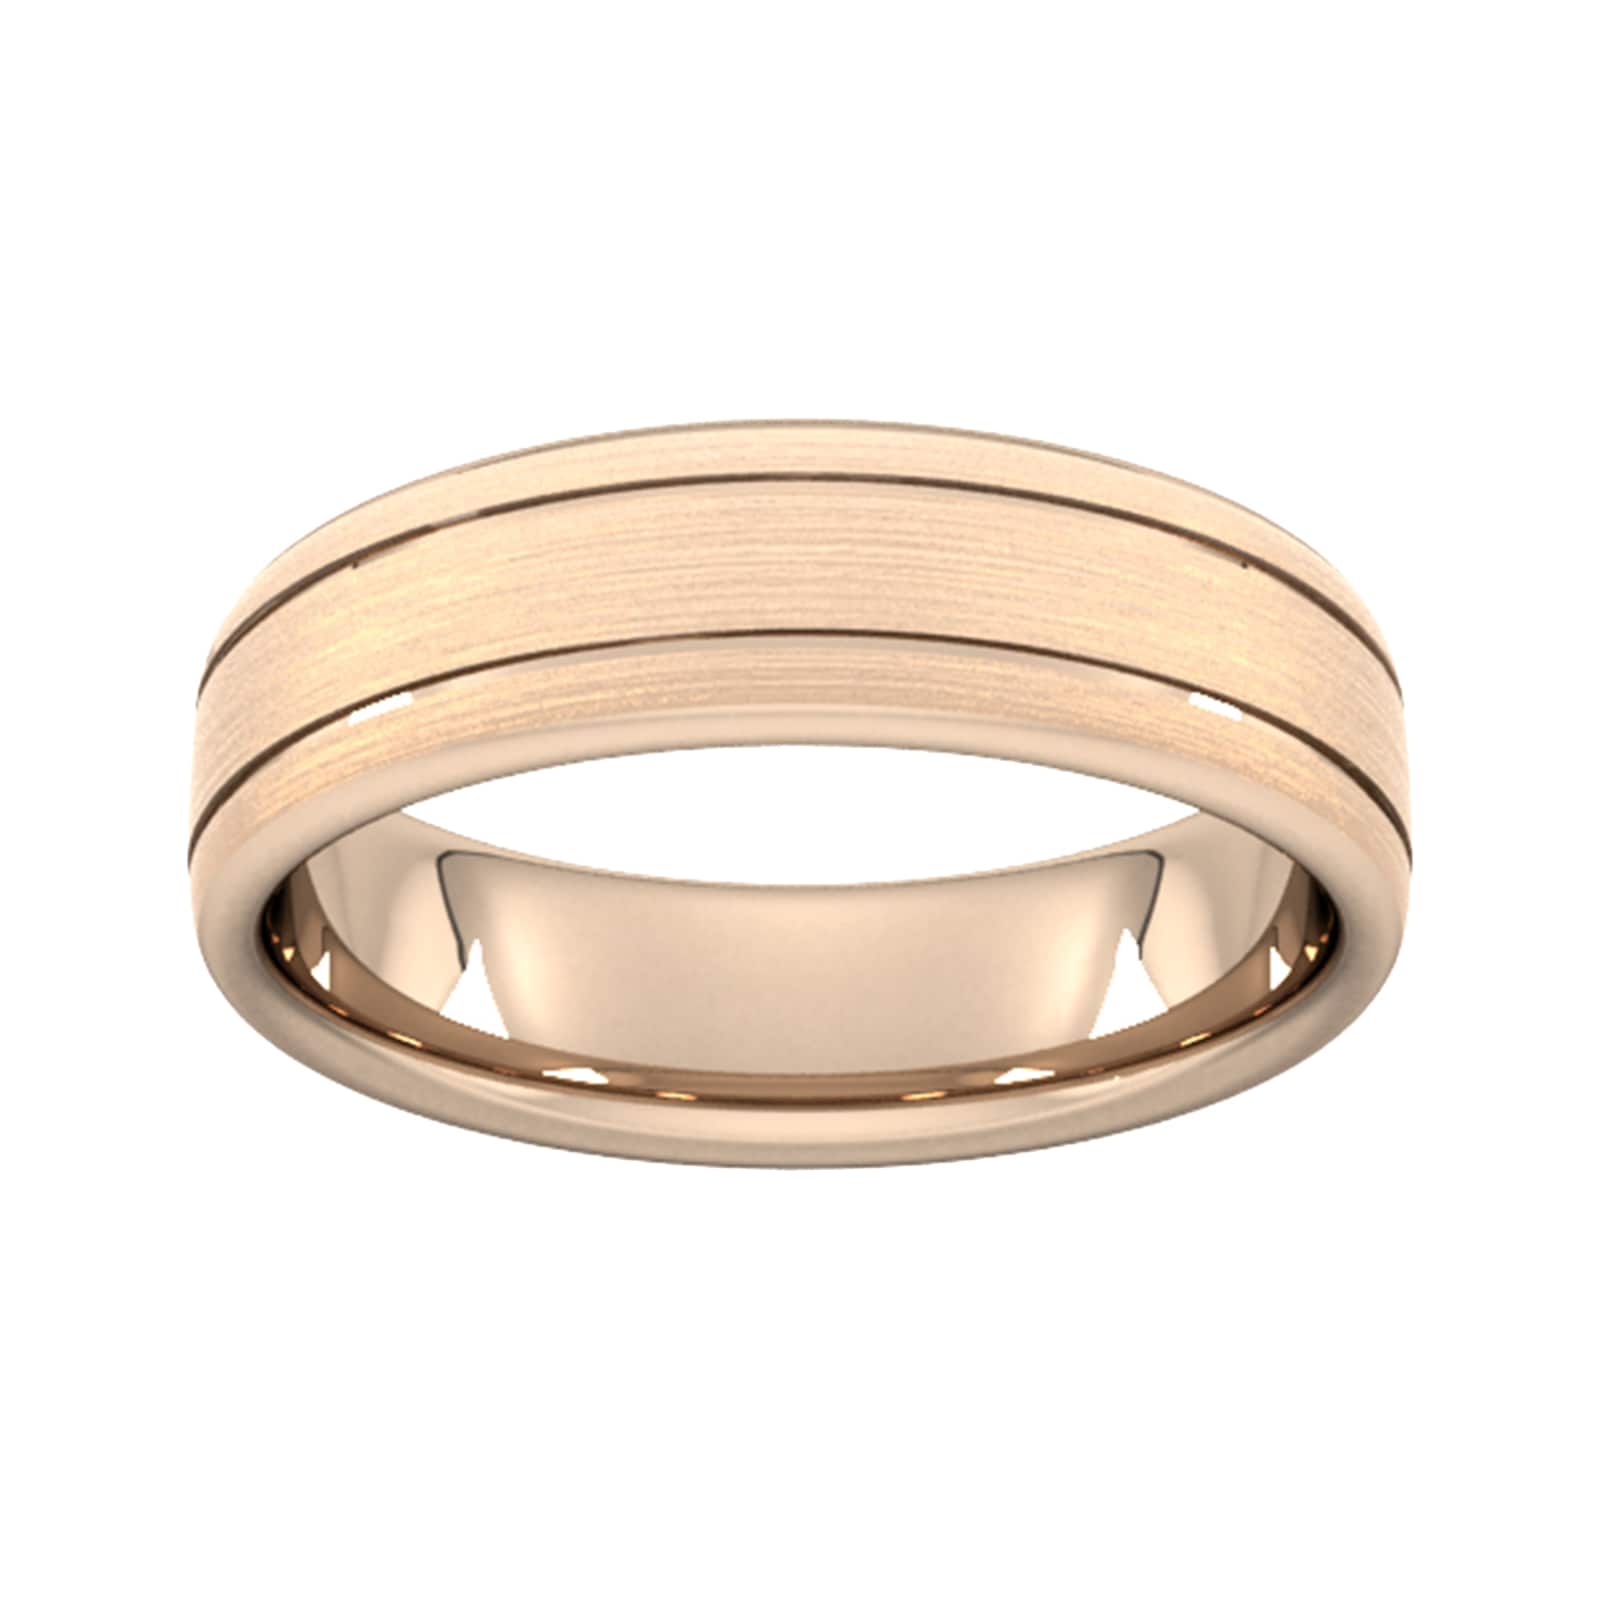 6mm D Shape Heavy Matt Finish With Double Grooves Wedding Ring In 9 Carat Rose Gold - Ring Size J